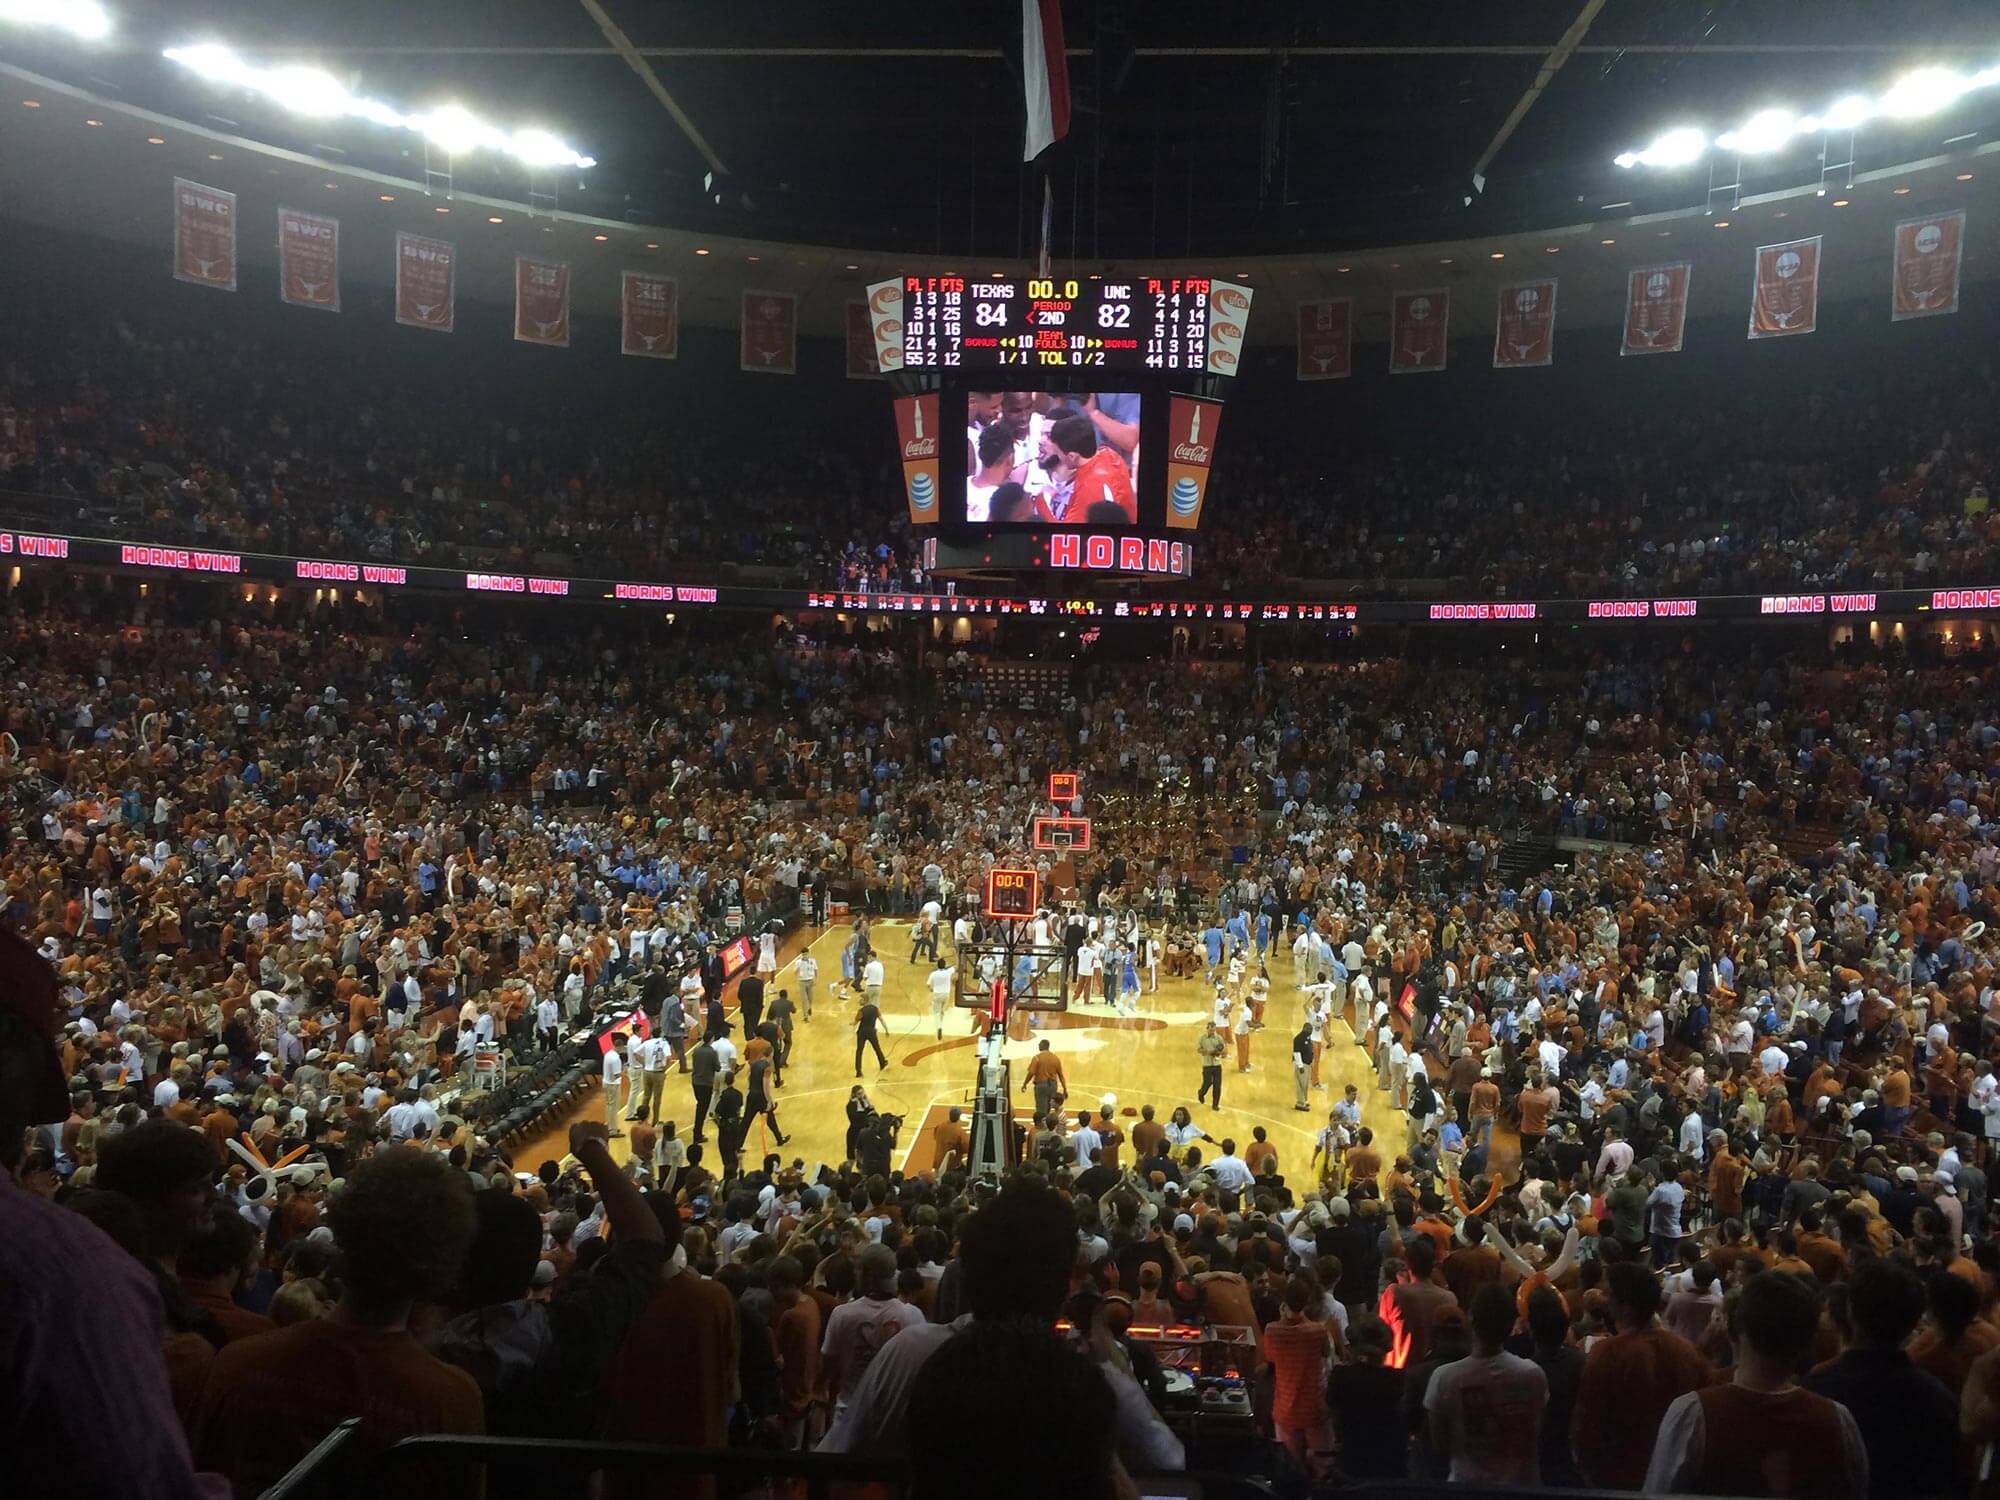 Texas men's basketball and fans celebrate a win over North Carolina at the Frank Erwin Center